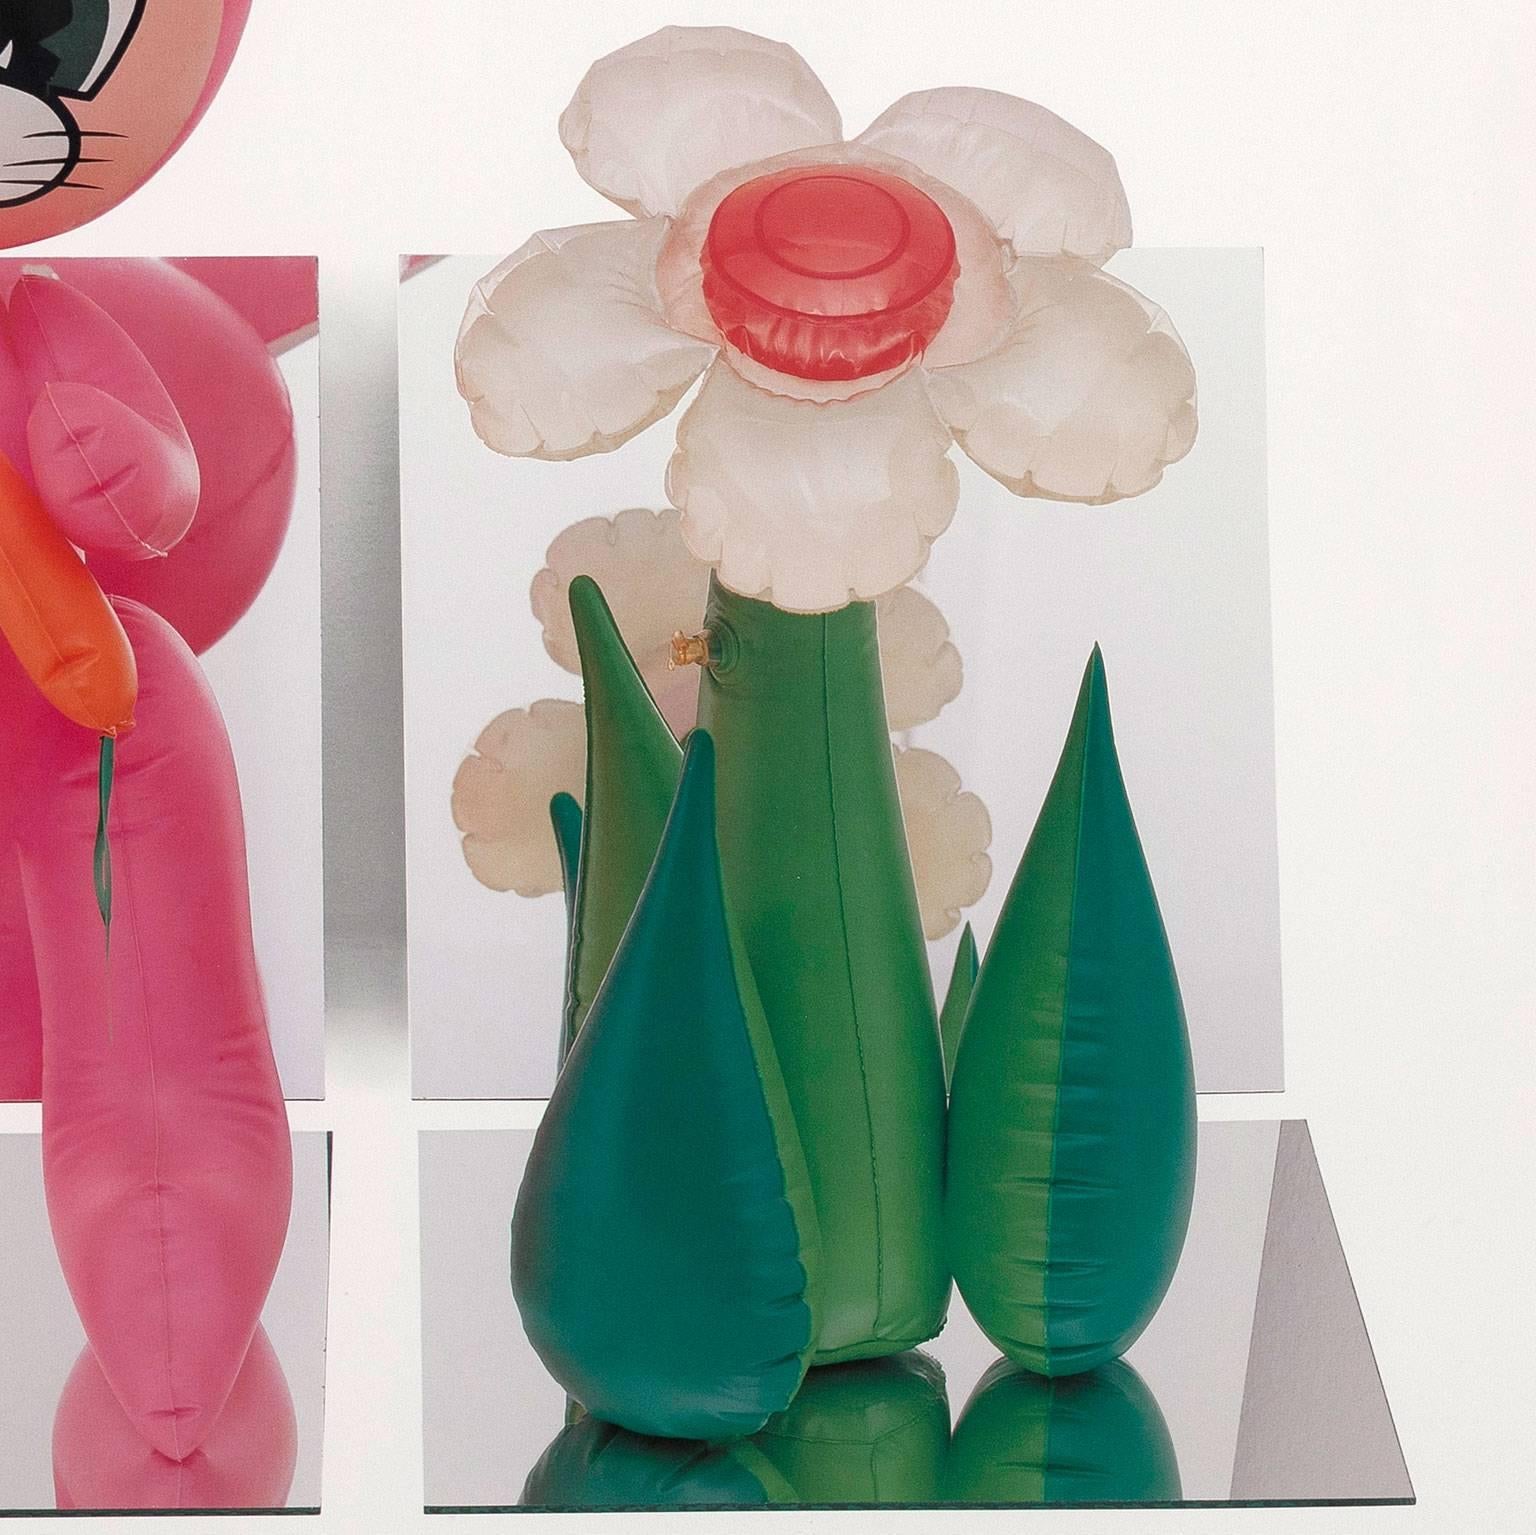 Inflatable Flower and Bunny   - Gray Abstract Print by Jeff Koons